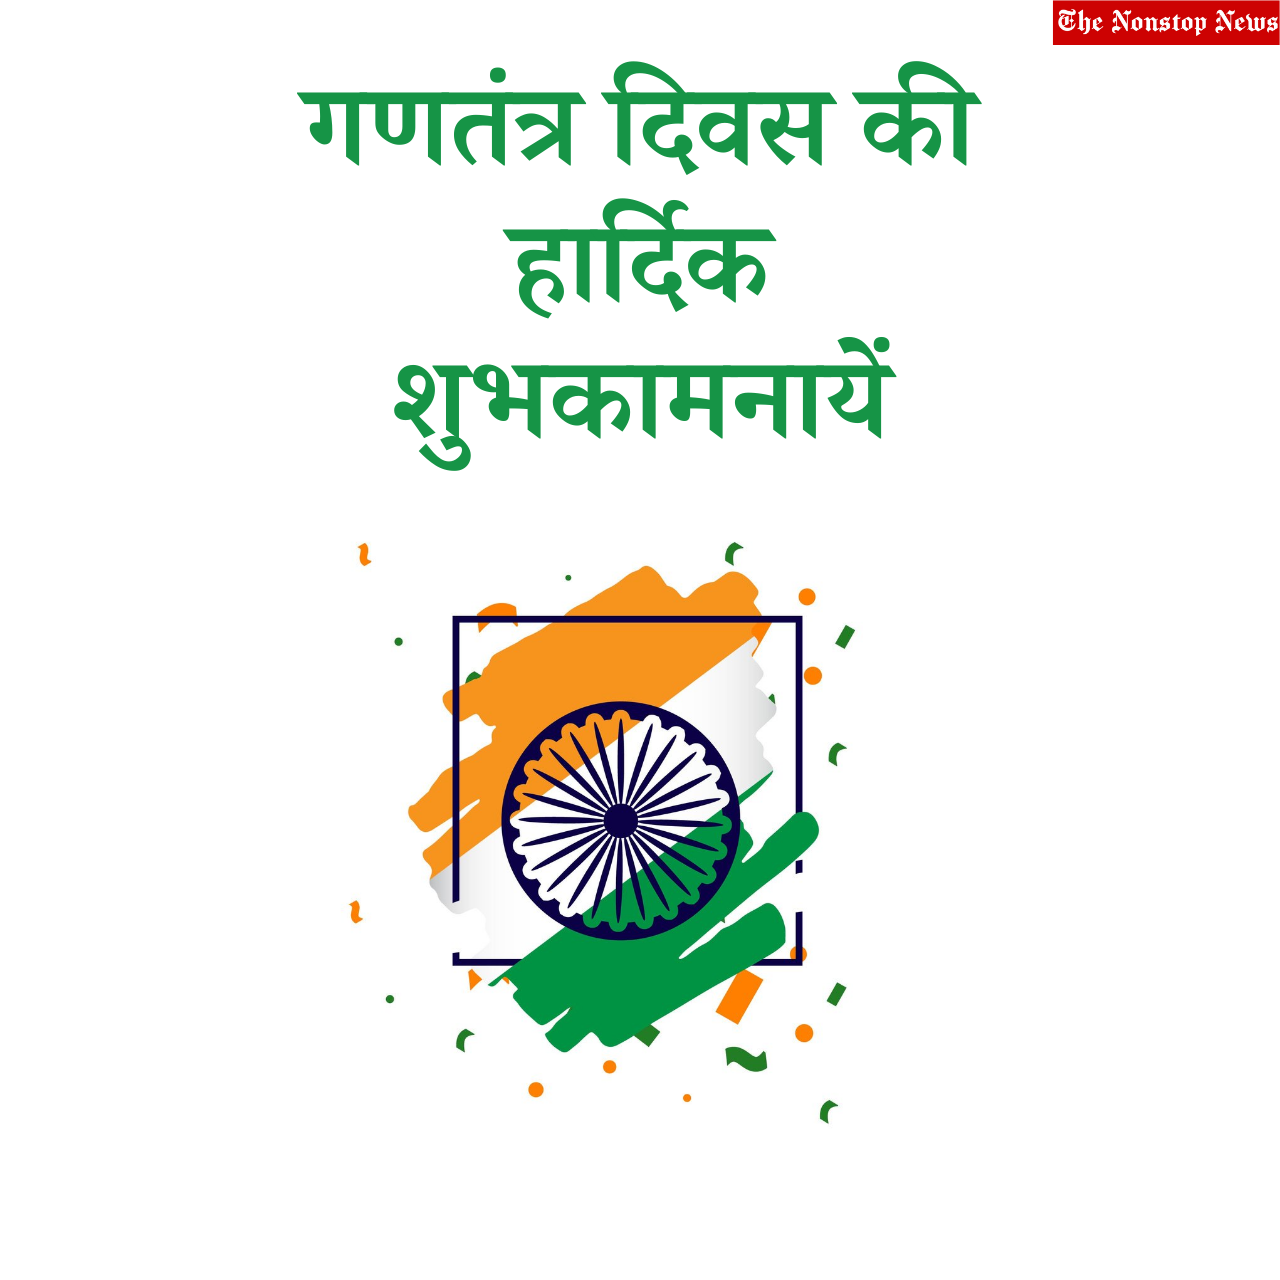 Gantantra Diwas 2022: Hindi Posters, Images, Wishes, Quotes, Greetings, Messages, Status, Shayari, Slogans to Share on 73rd Indian Republic Day